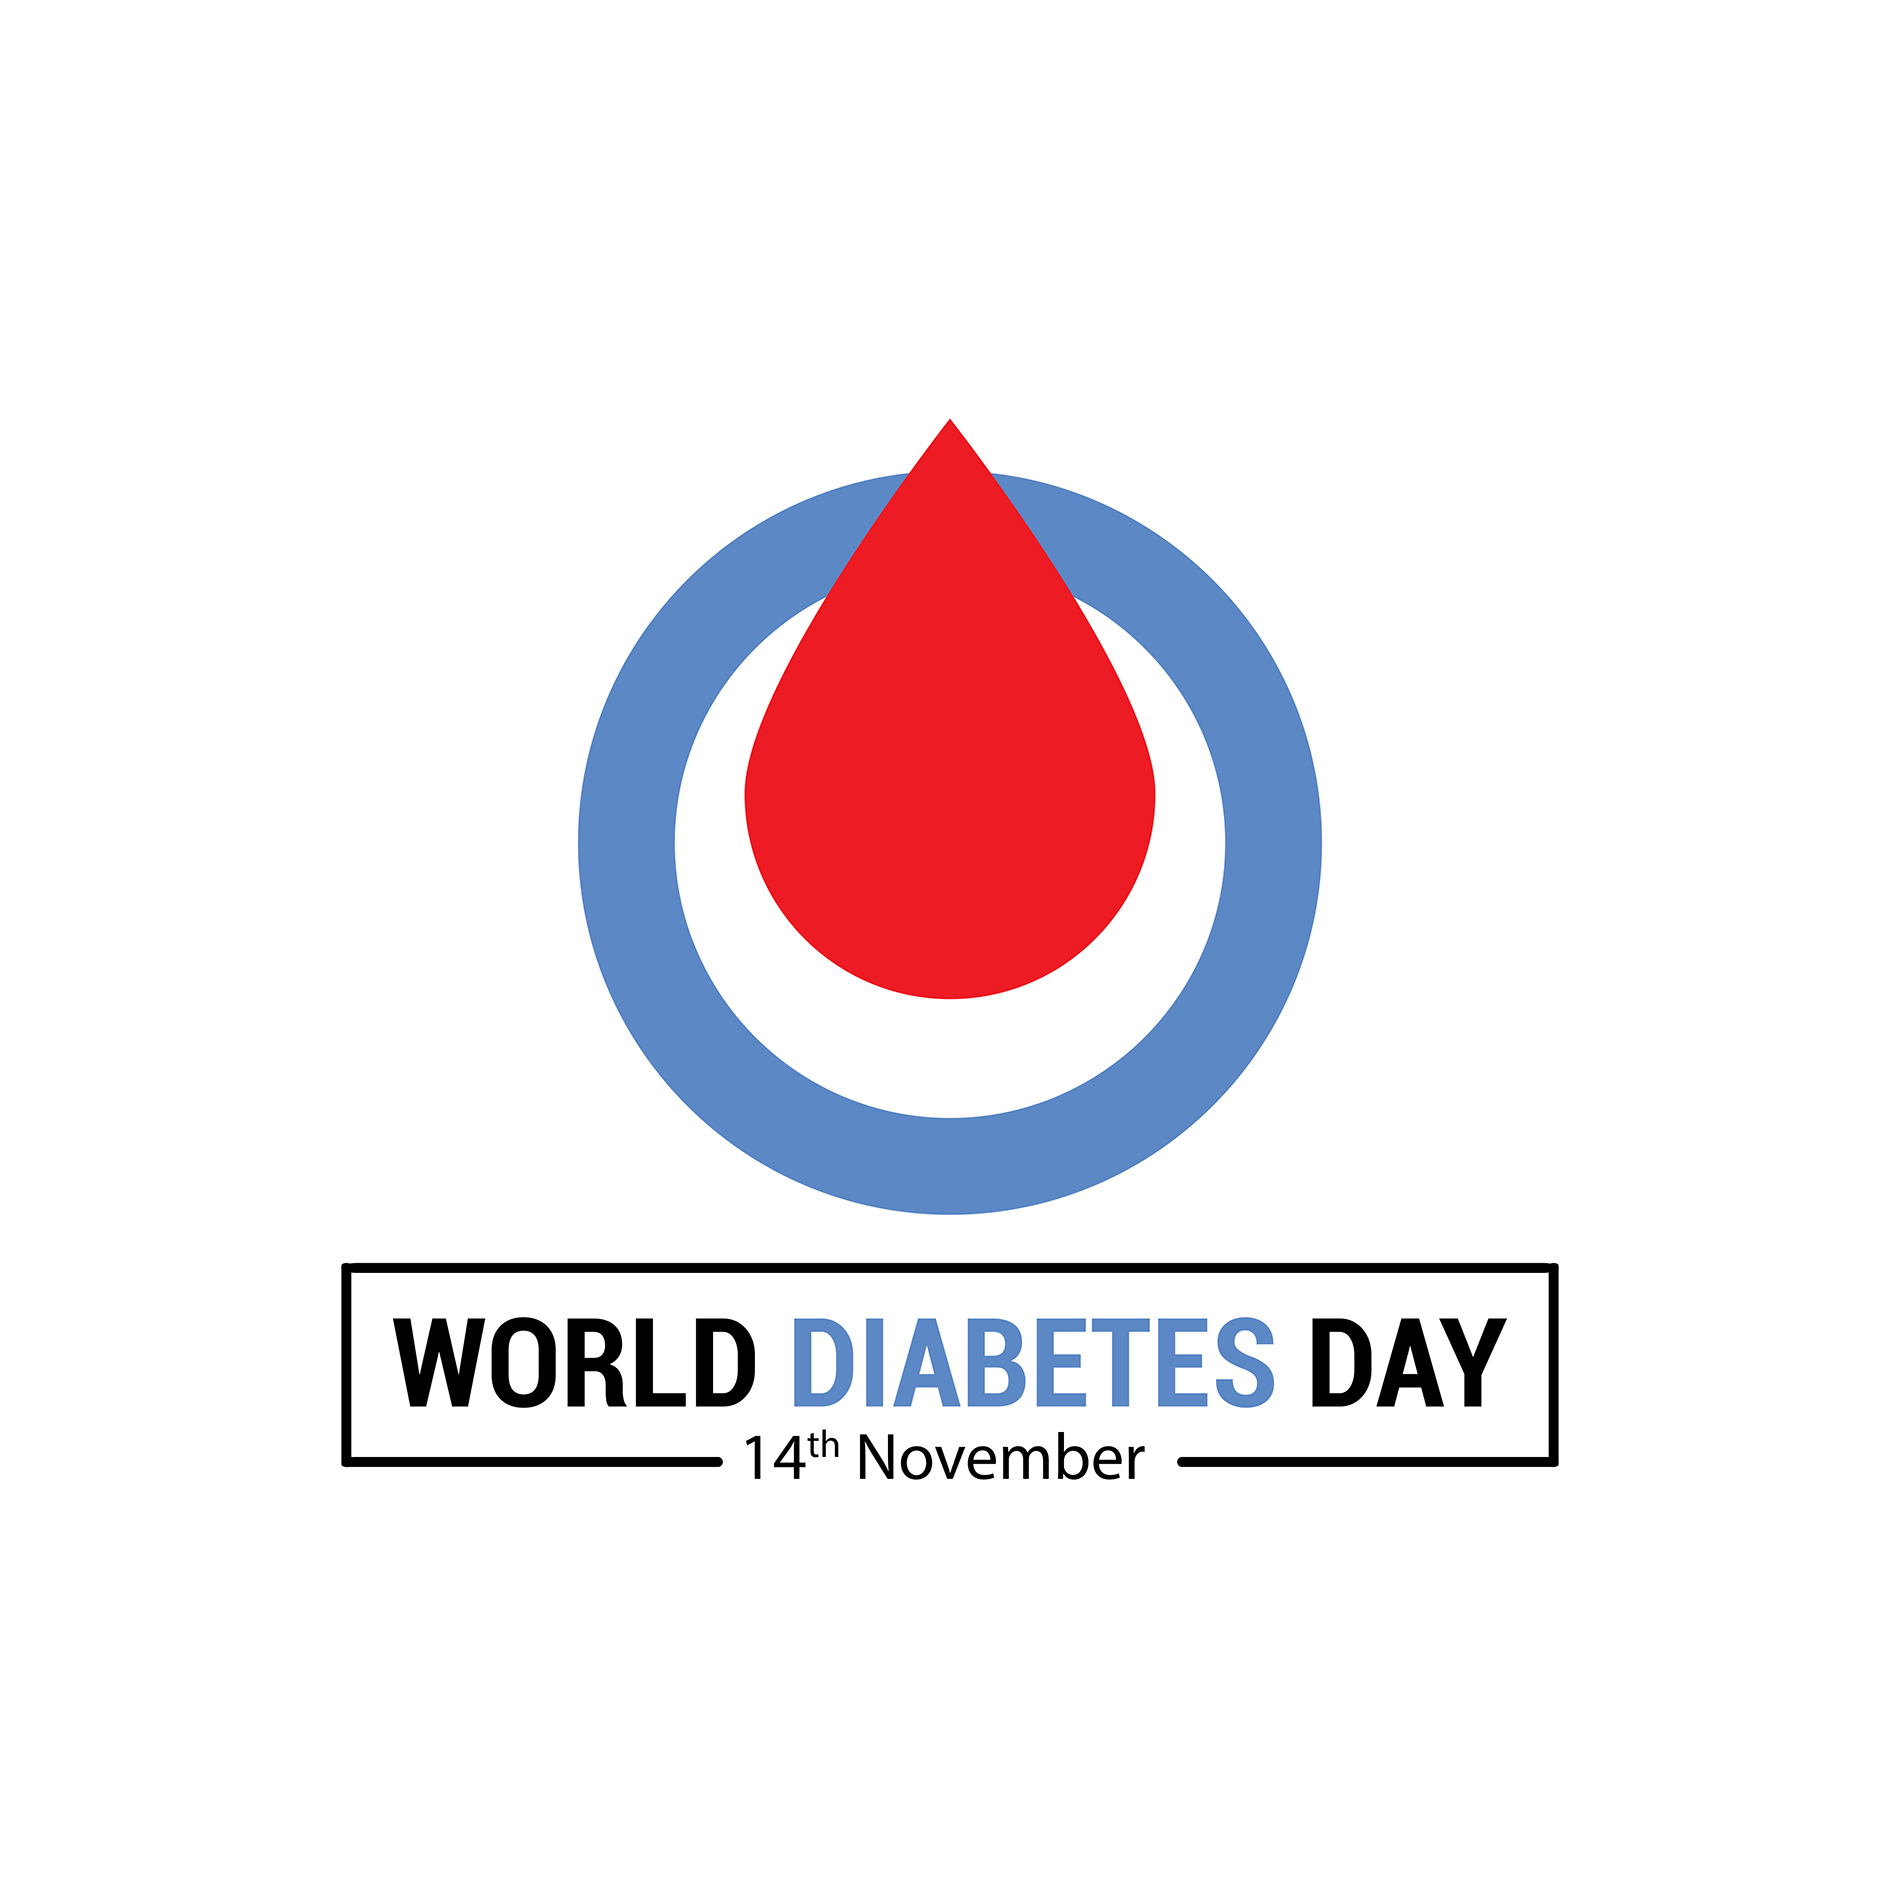 Minimal world diabetes awareness day free vector illustration design for icon and stickers